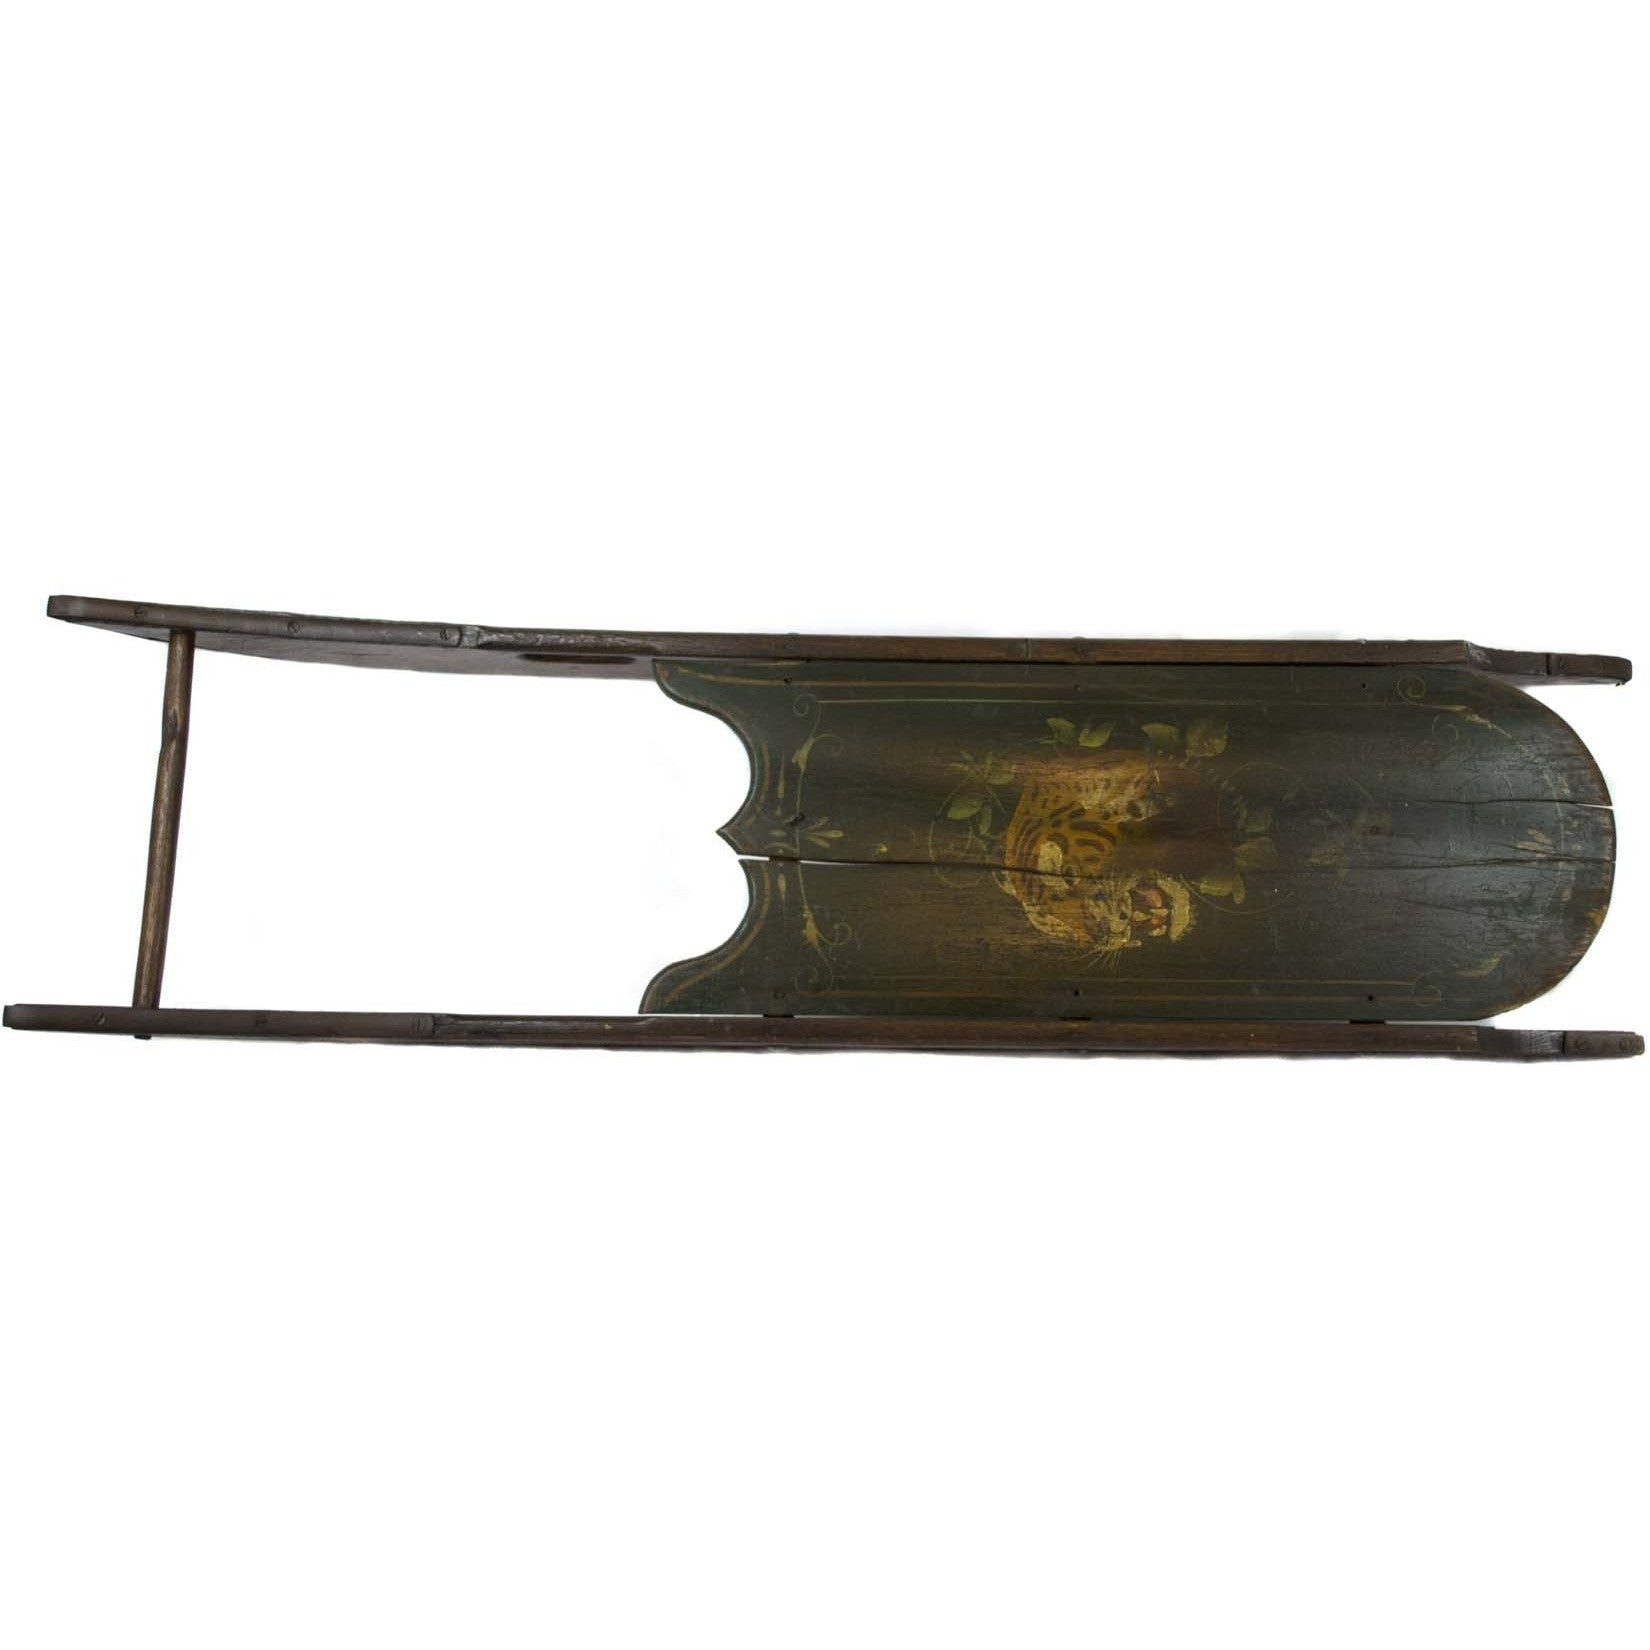 Decorative Antique Painted Wooden Child's Sled